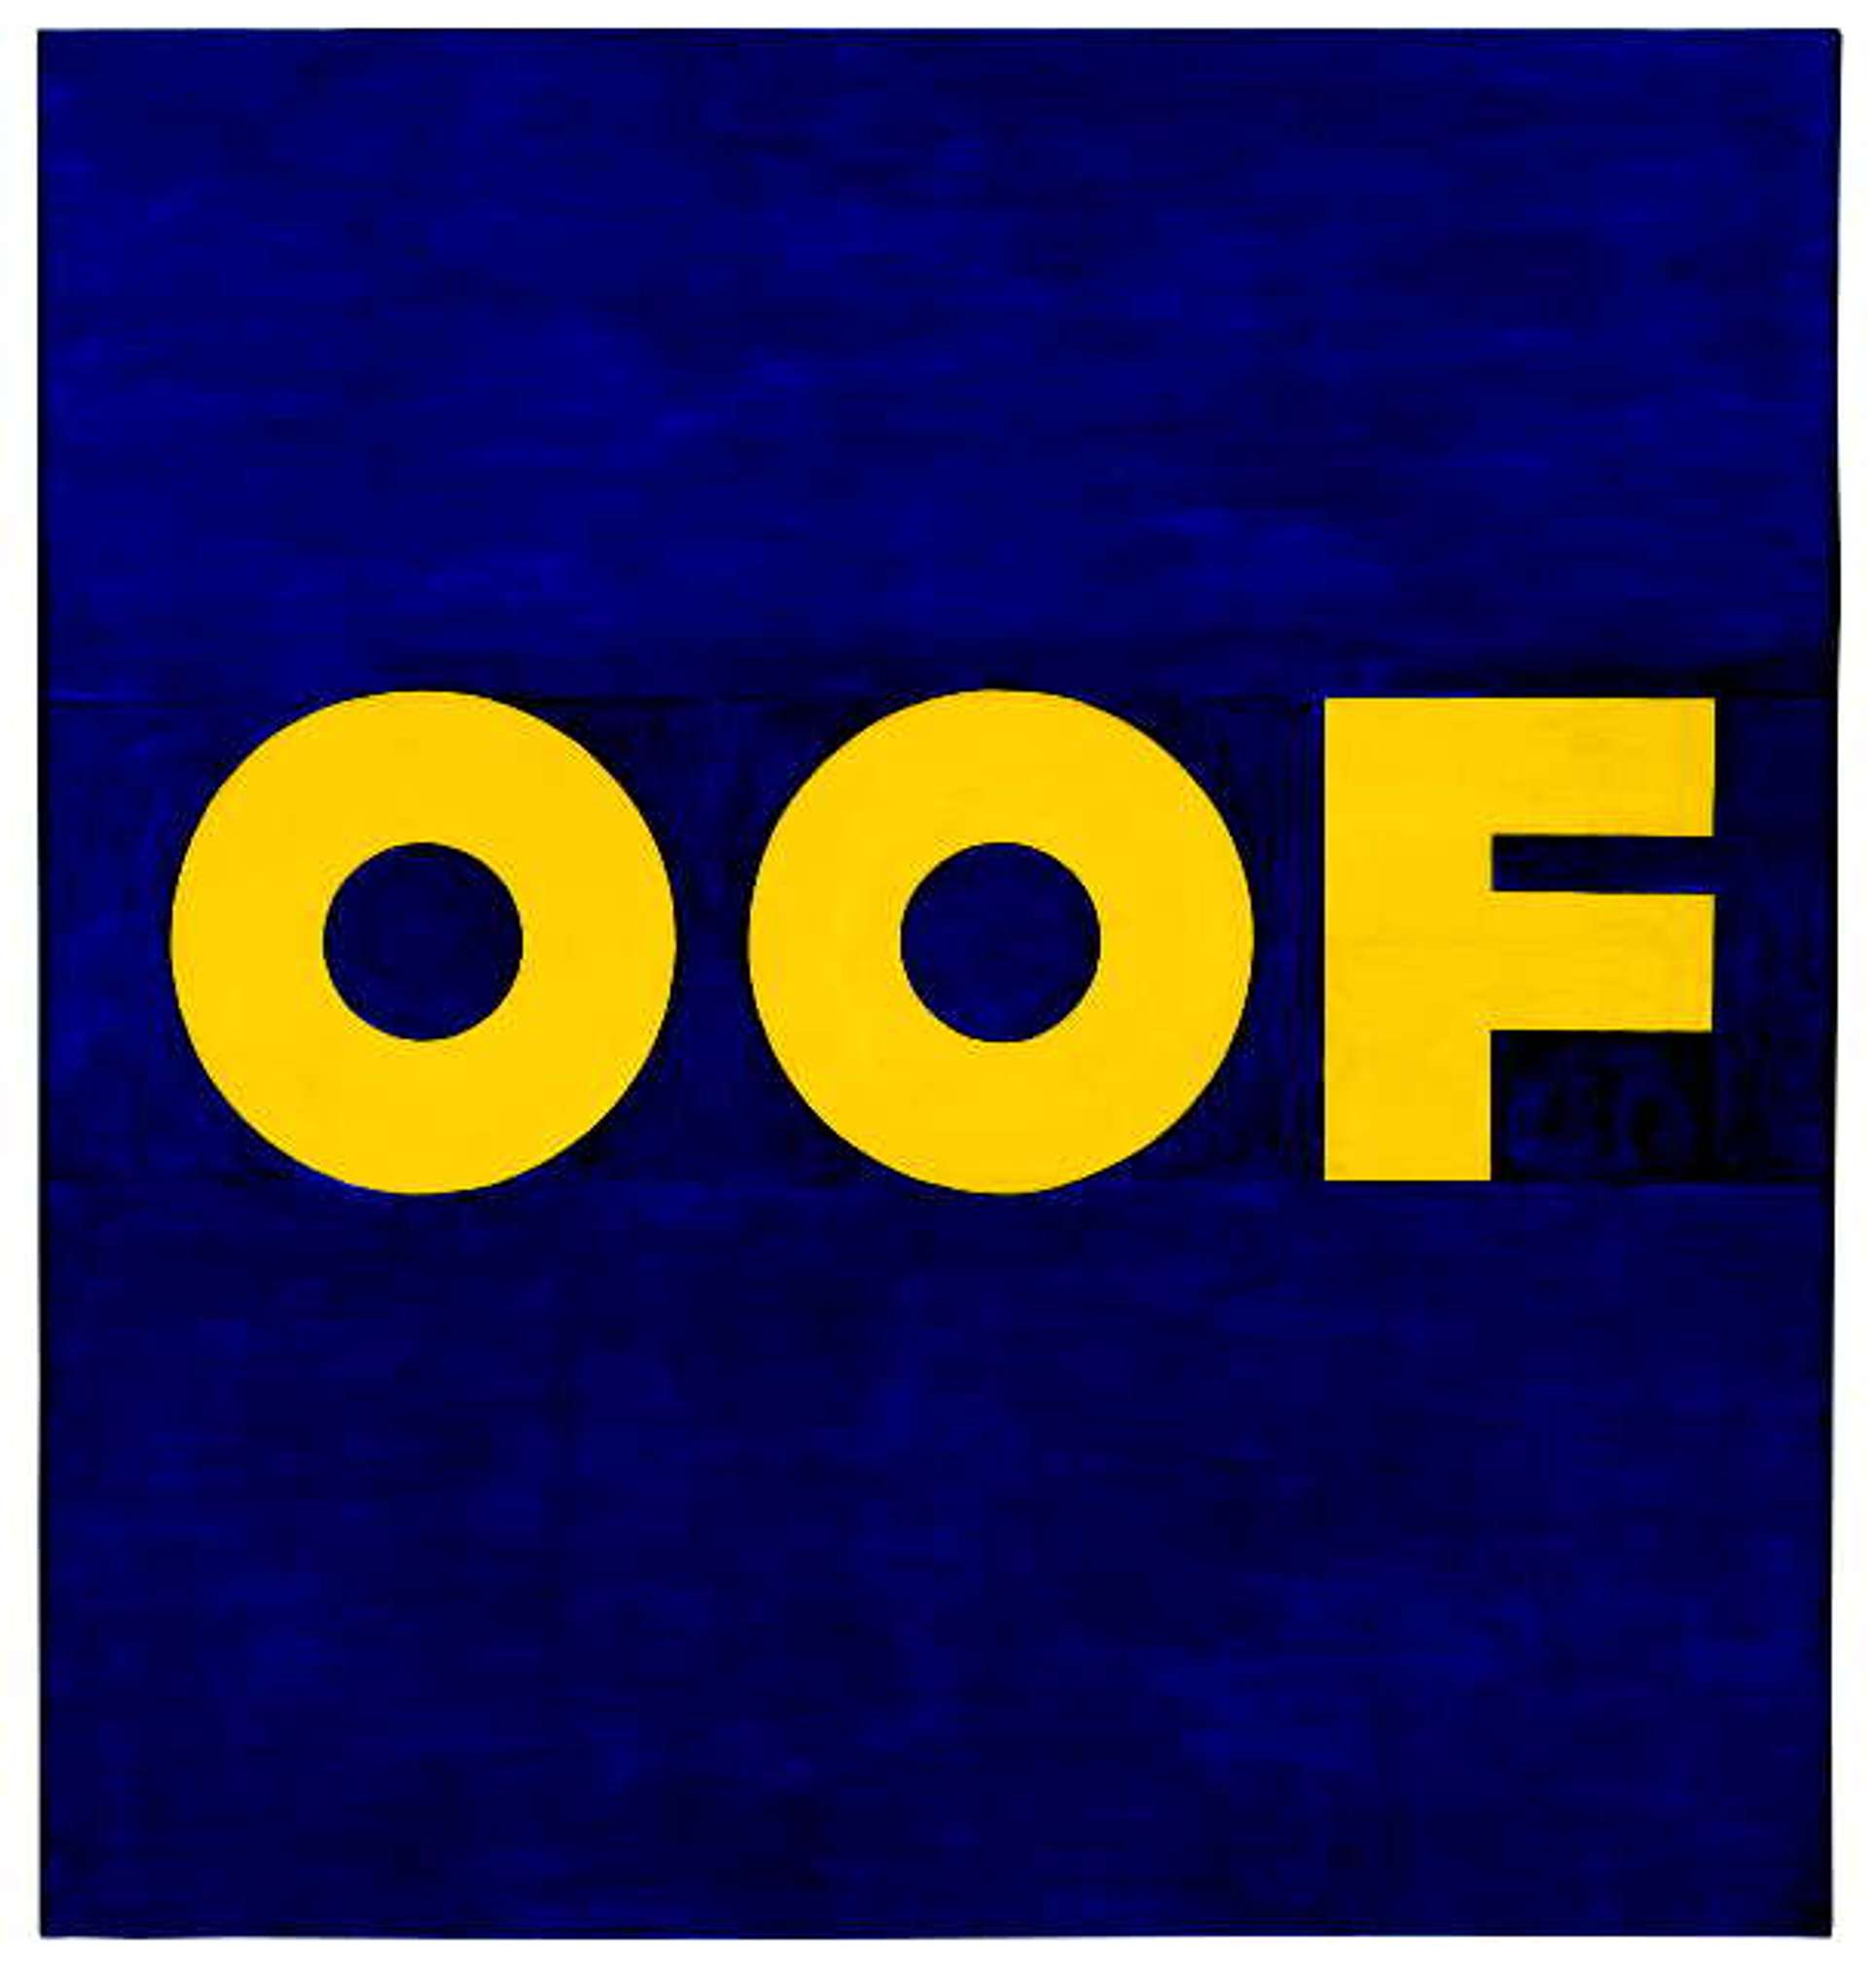 'OOF' written in bold yellow capitals on a dark blue background